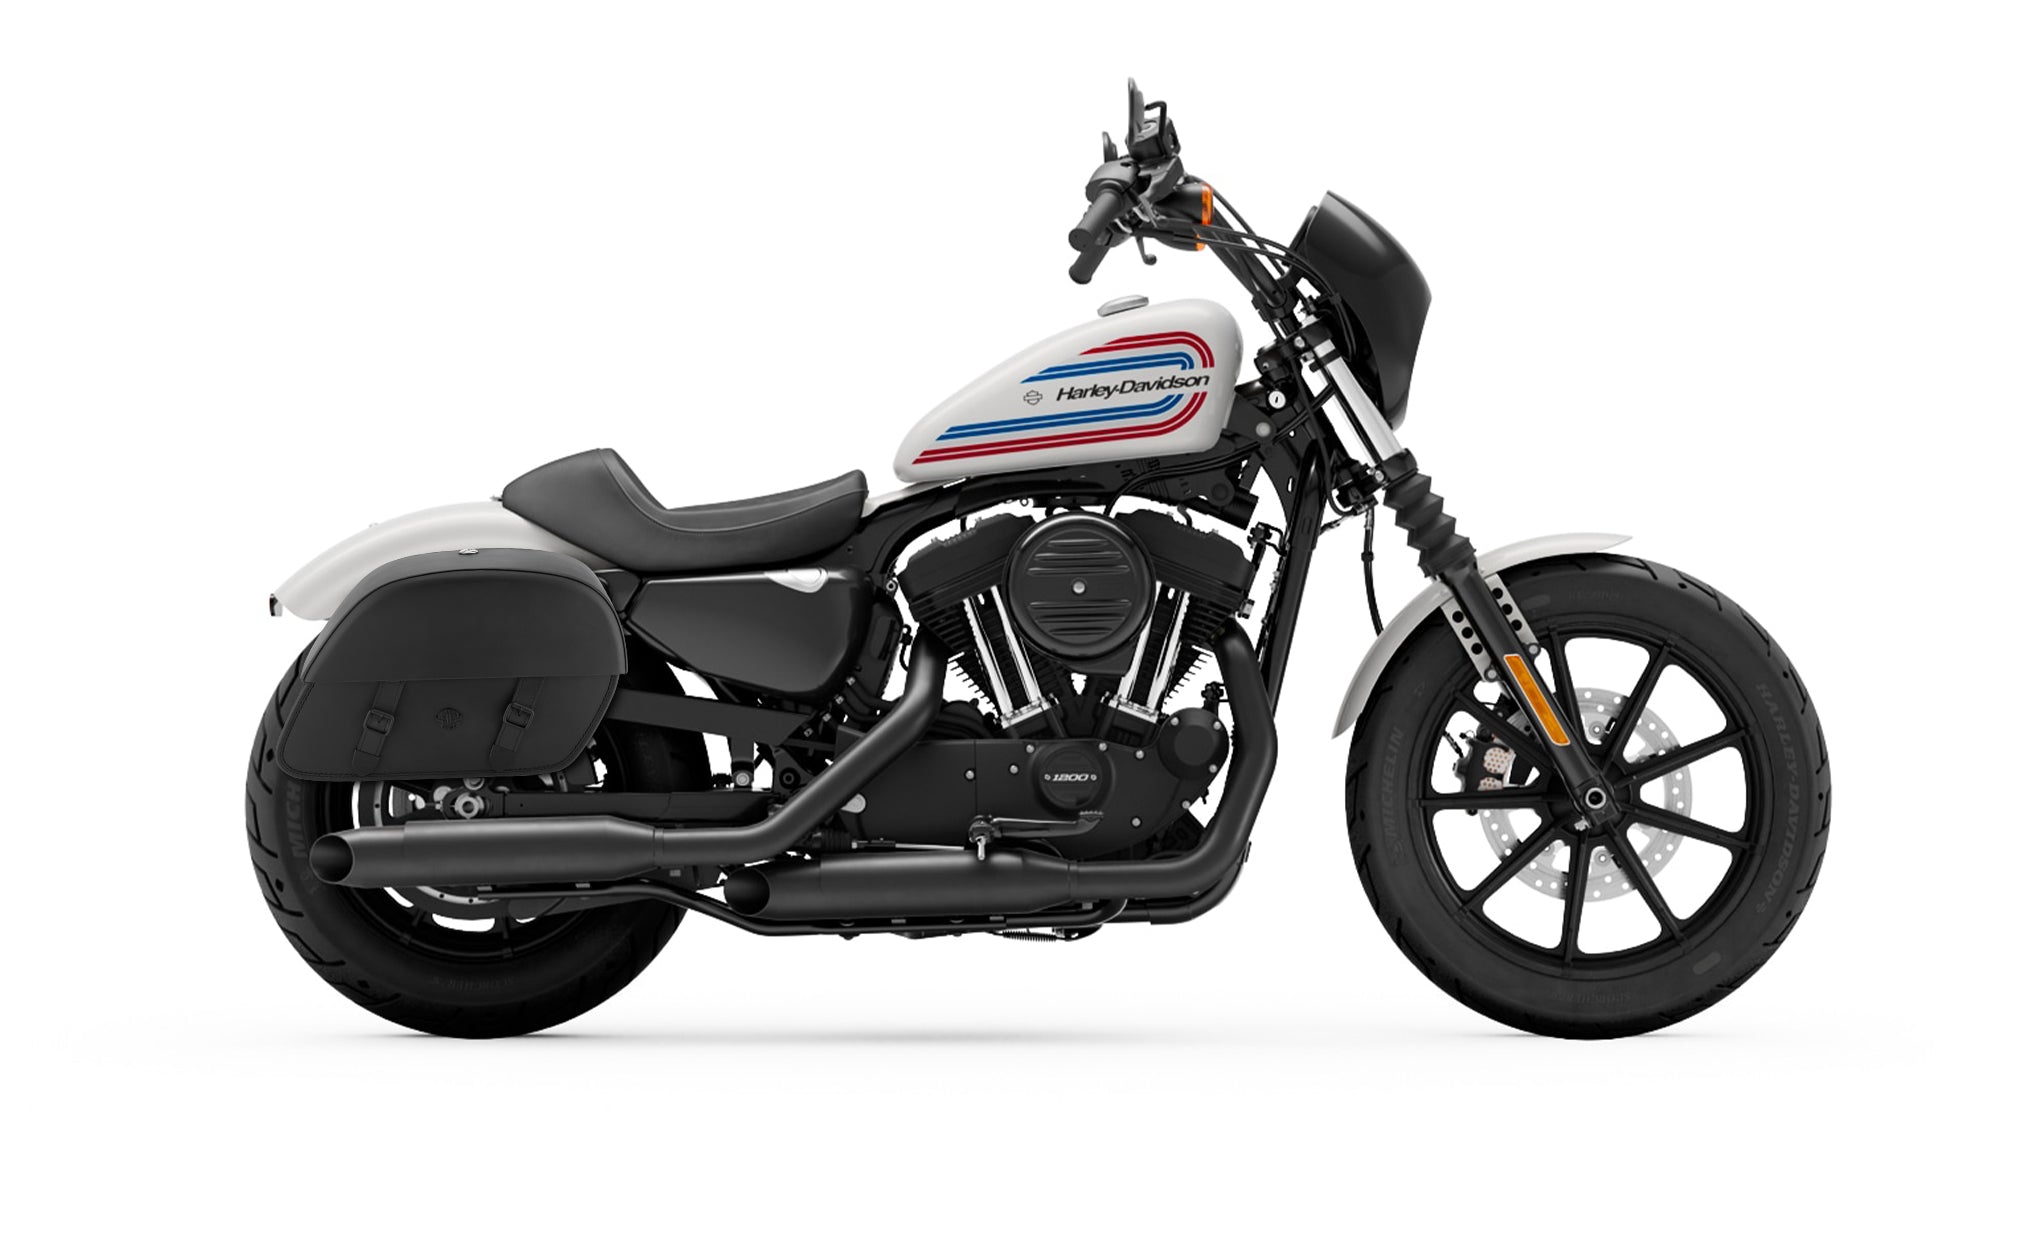 28L - Baelor Medium Quick Mount Motorcycle Saddlebags For Harley Sportster 1200 Iron XL1200NS @expand